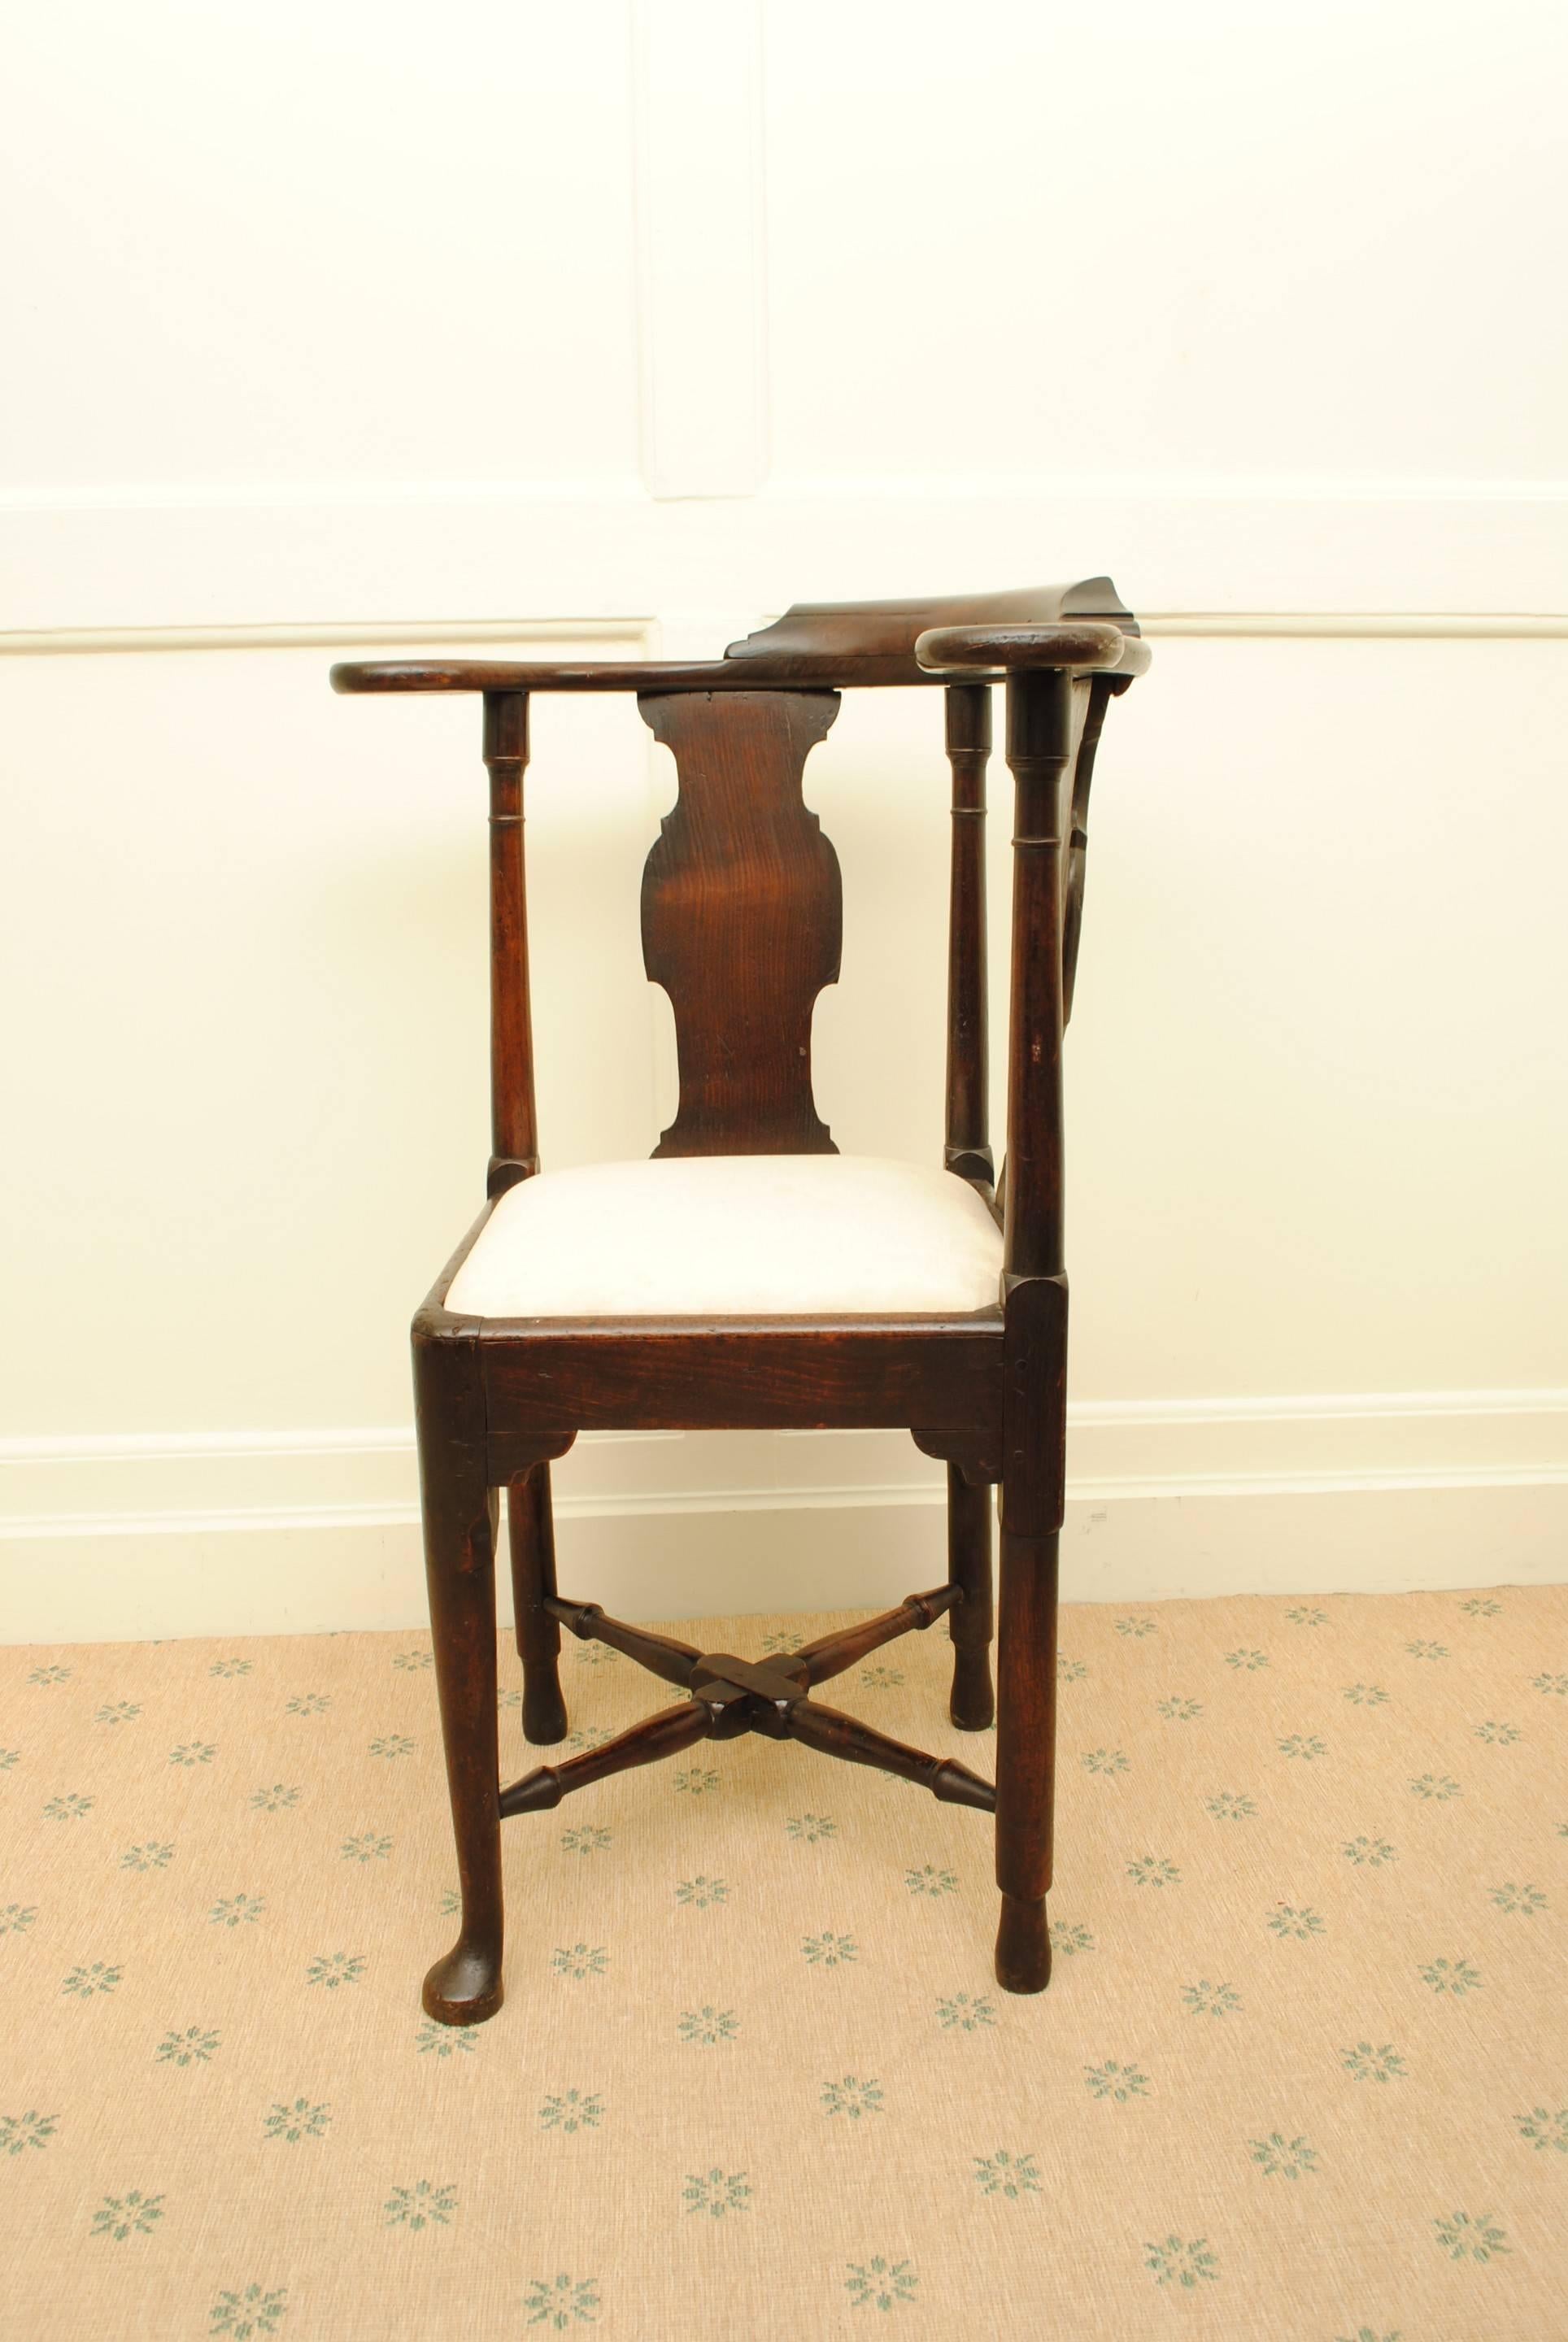 A large example of a mid 18th century mahogany corner chair with vase shaped back splat, good cpouor and patination.